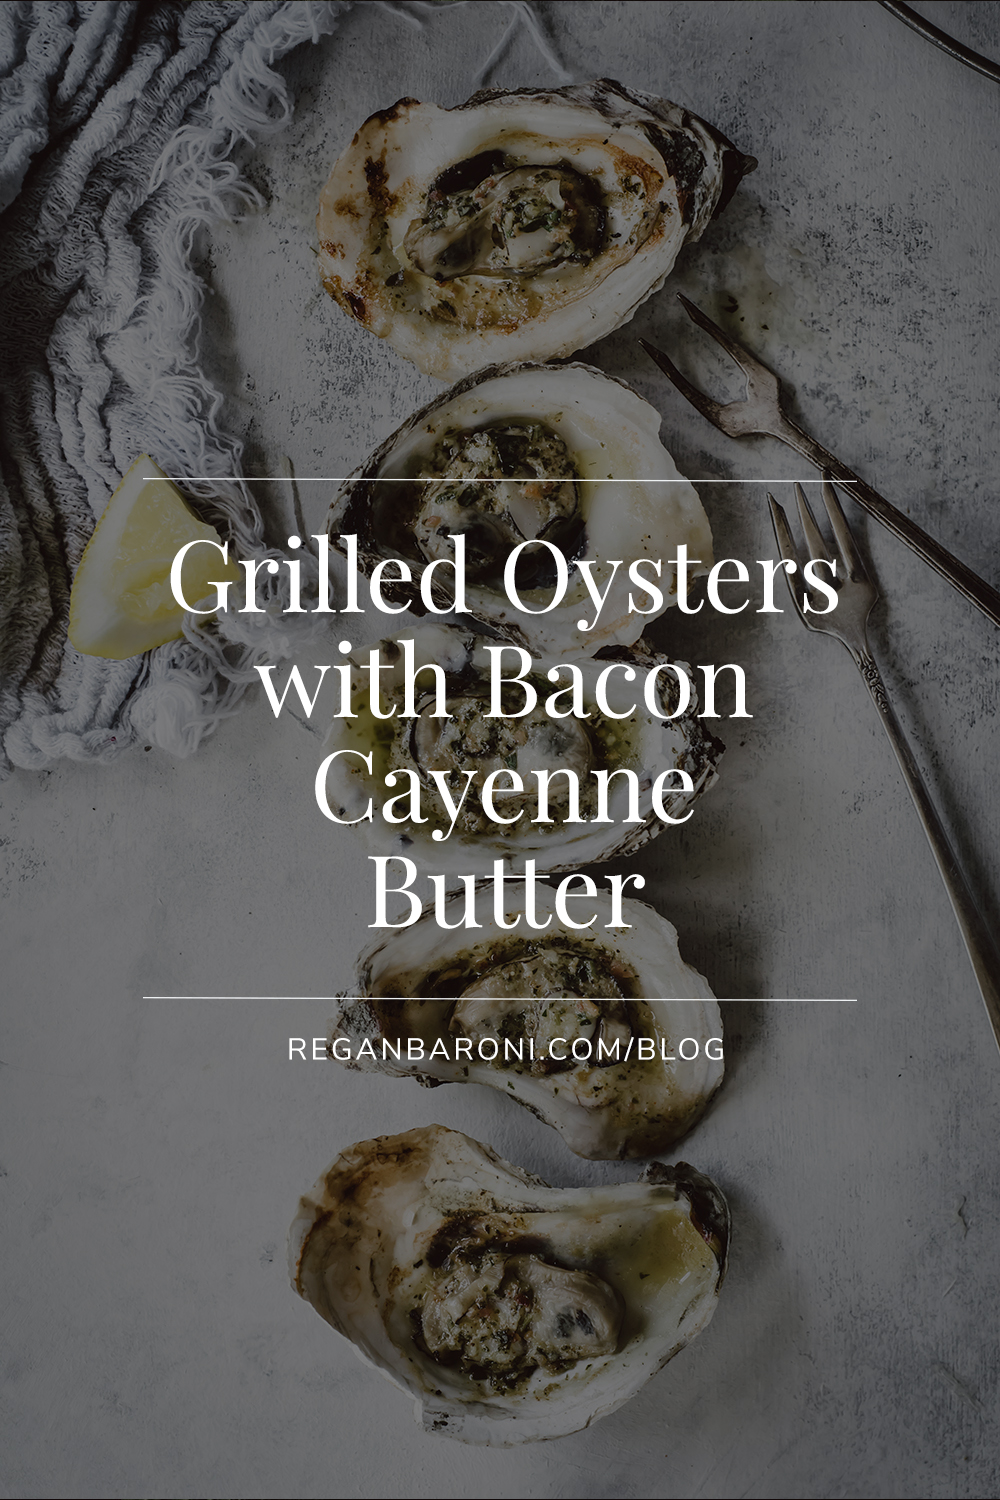 Grilled Oysters with Bacon Cayenne Butter